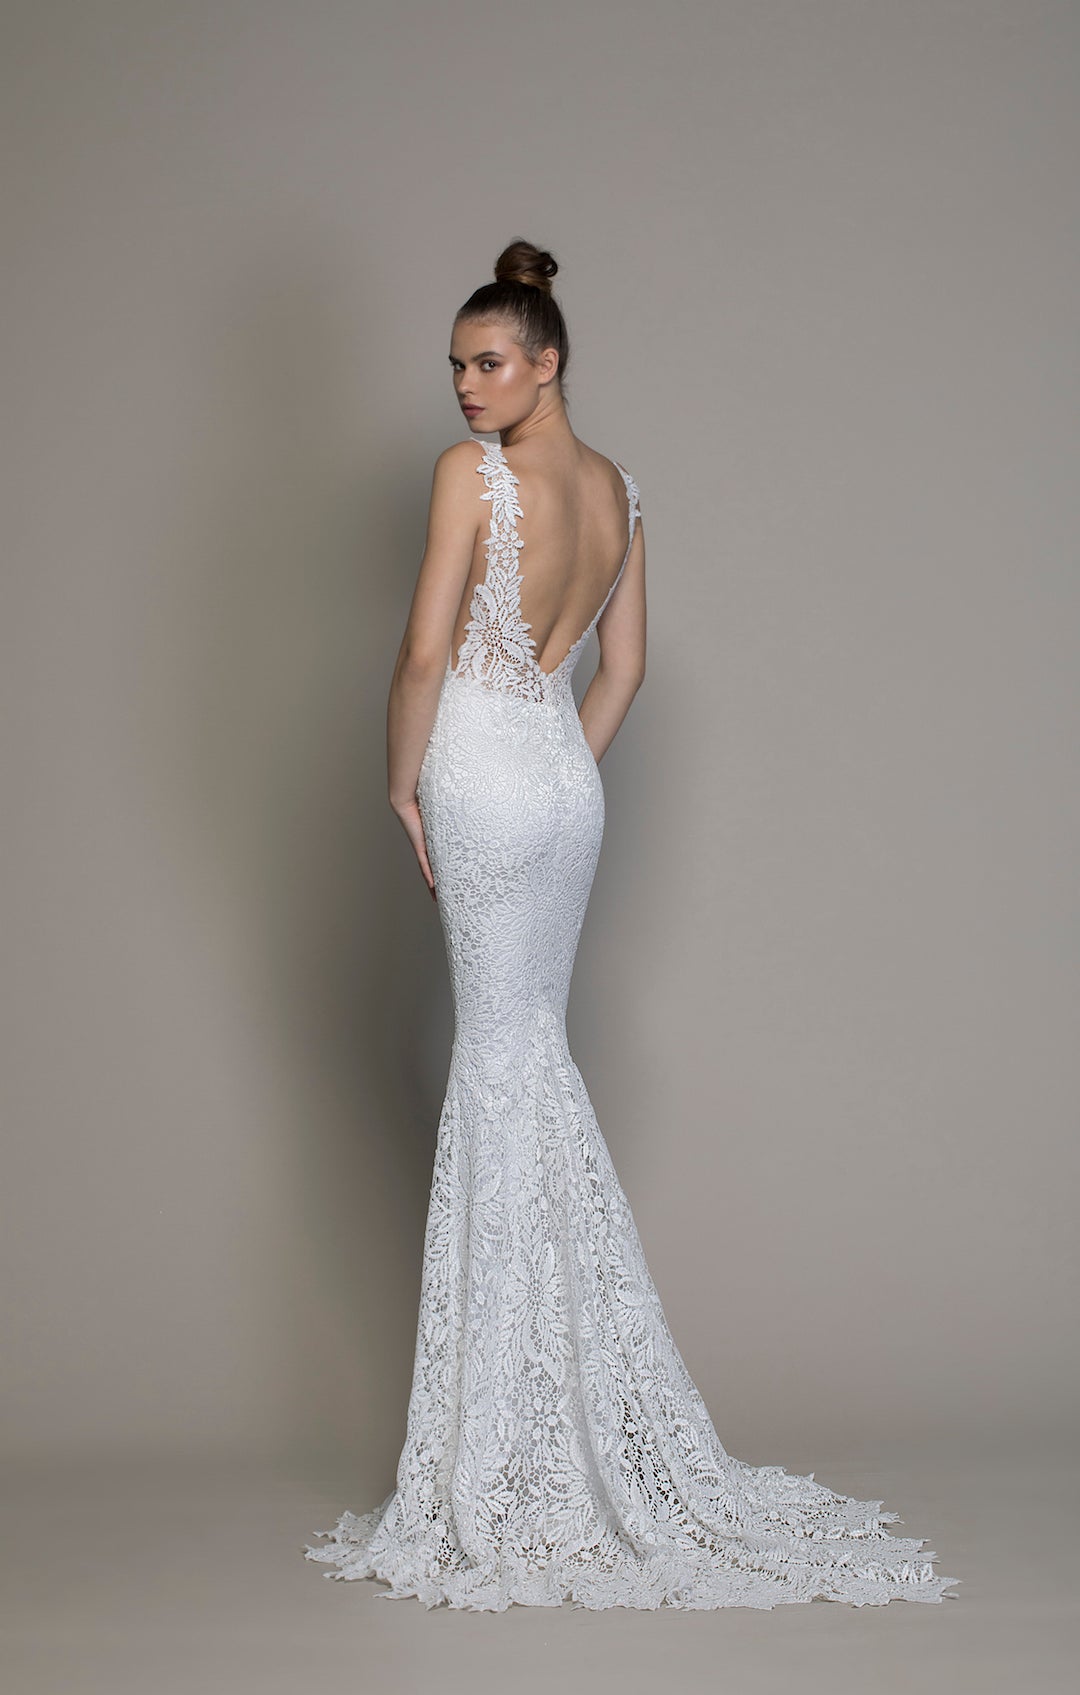 Pnina Tornai's new LOVE 2020 Collection is out! This is style 14759